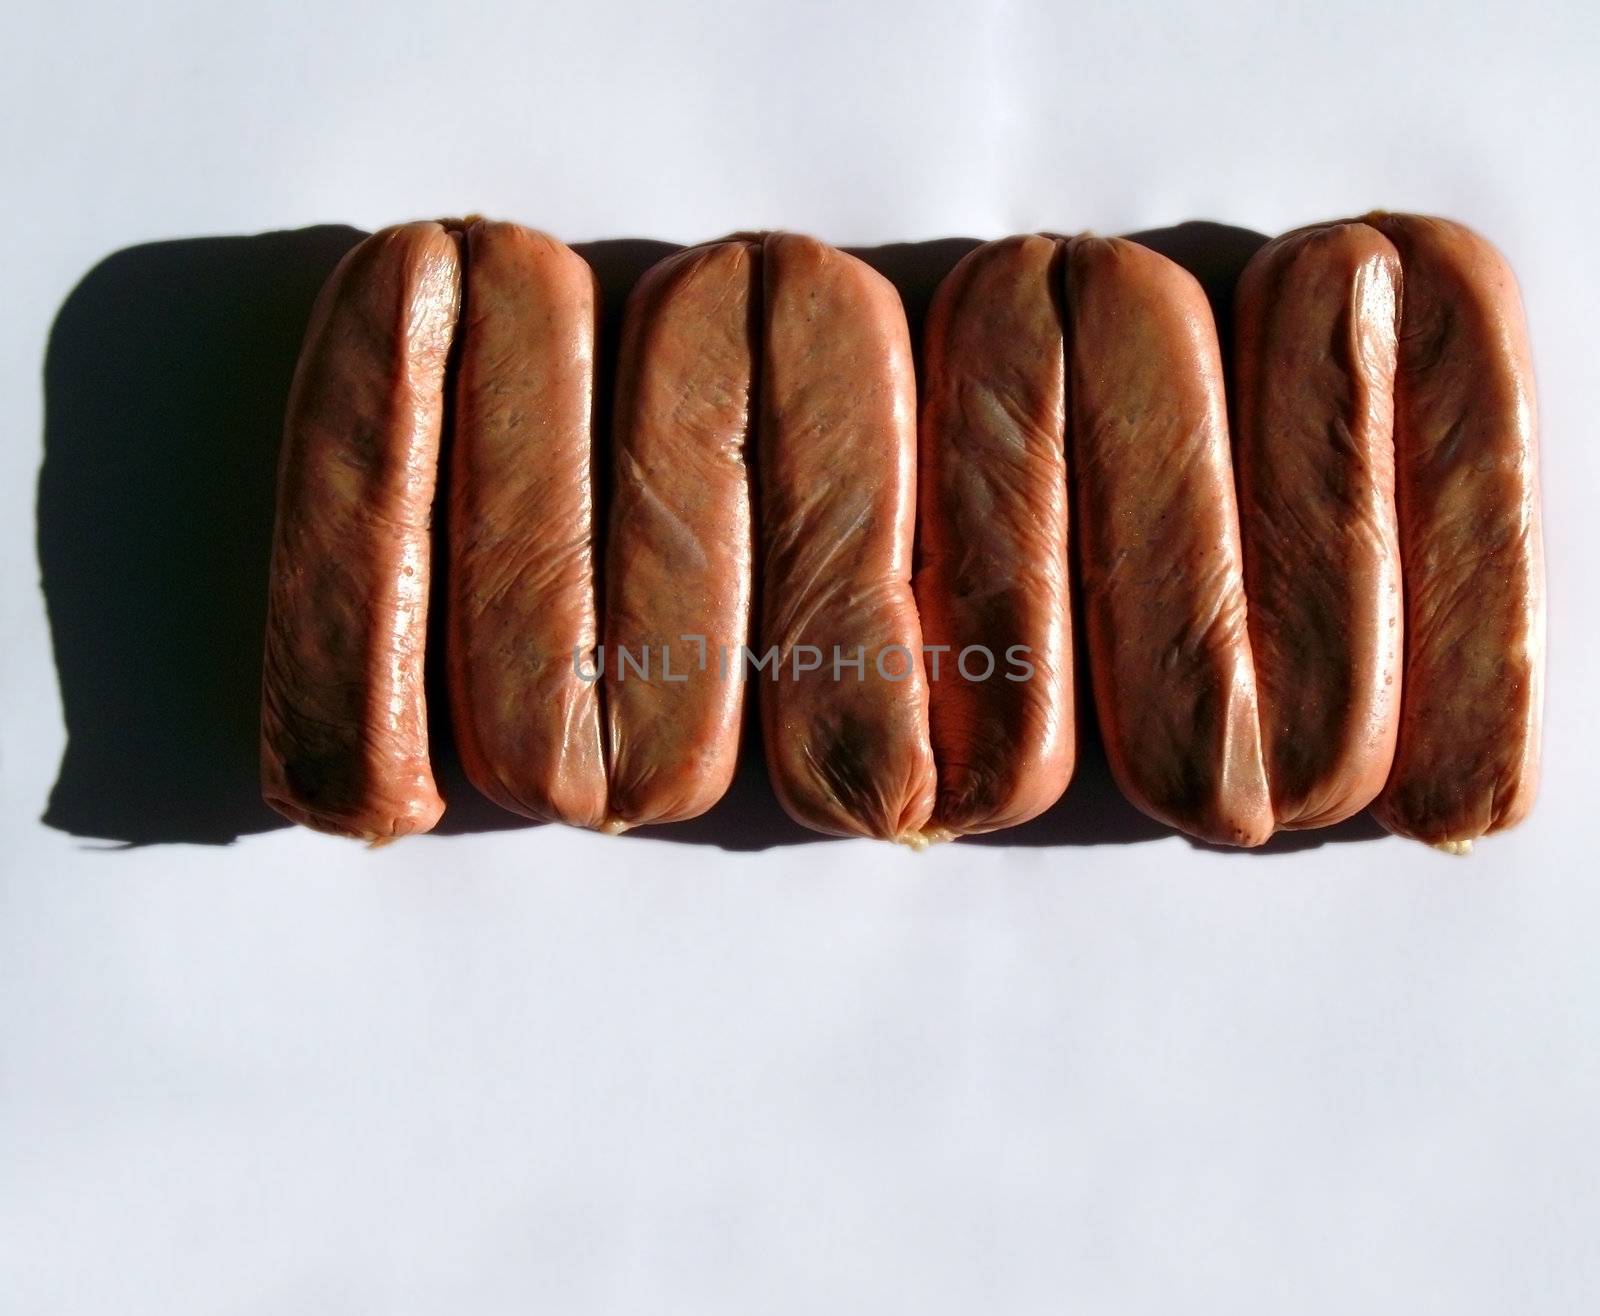 Eight uncooked link sausages in appropriate raw, harsh light. With copyspace